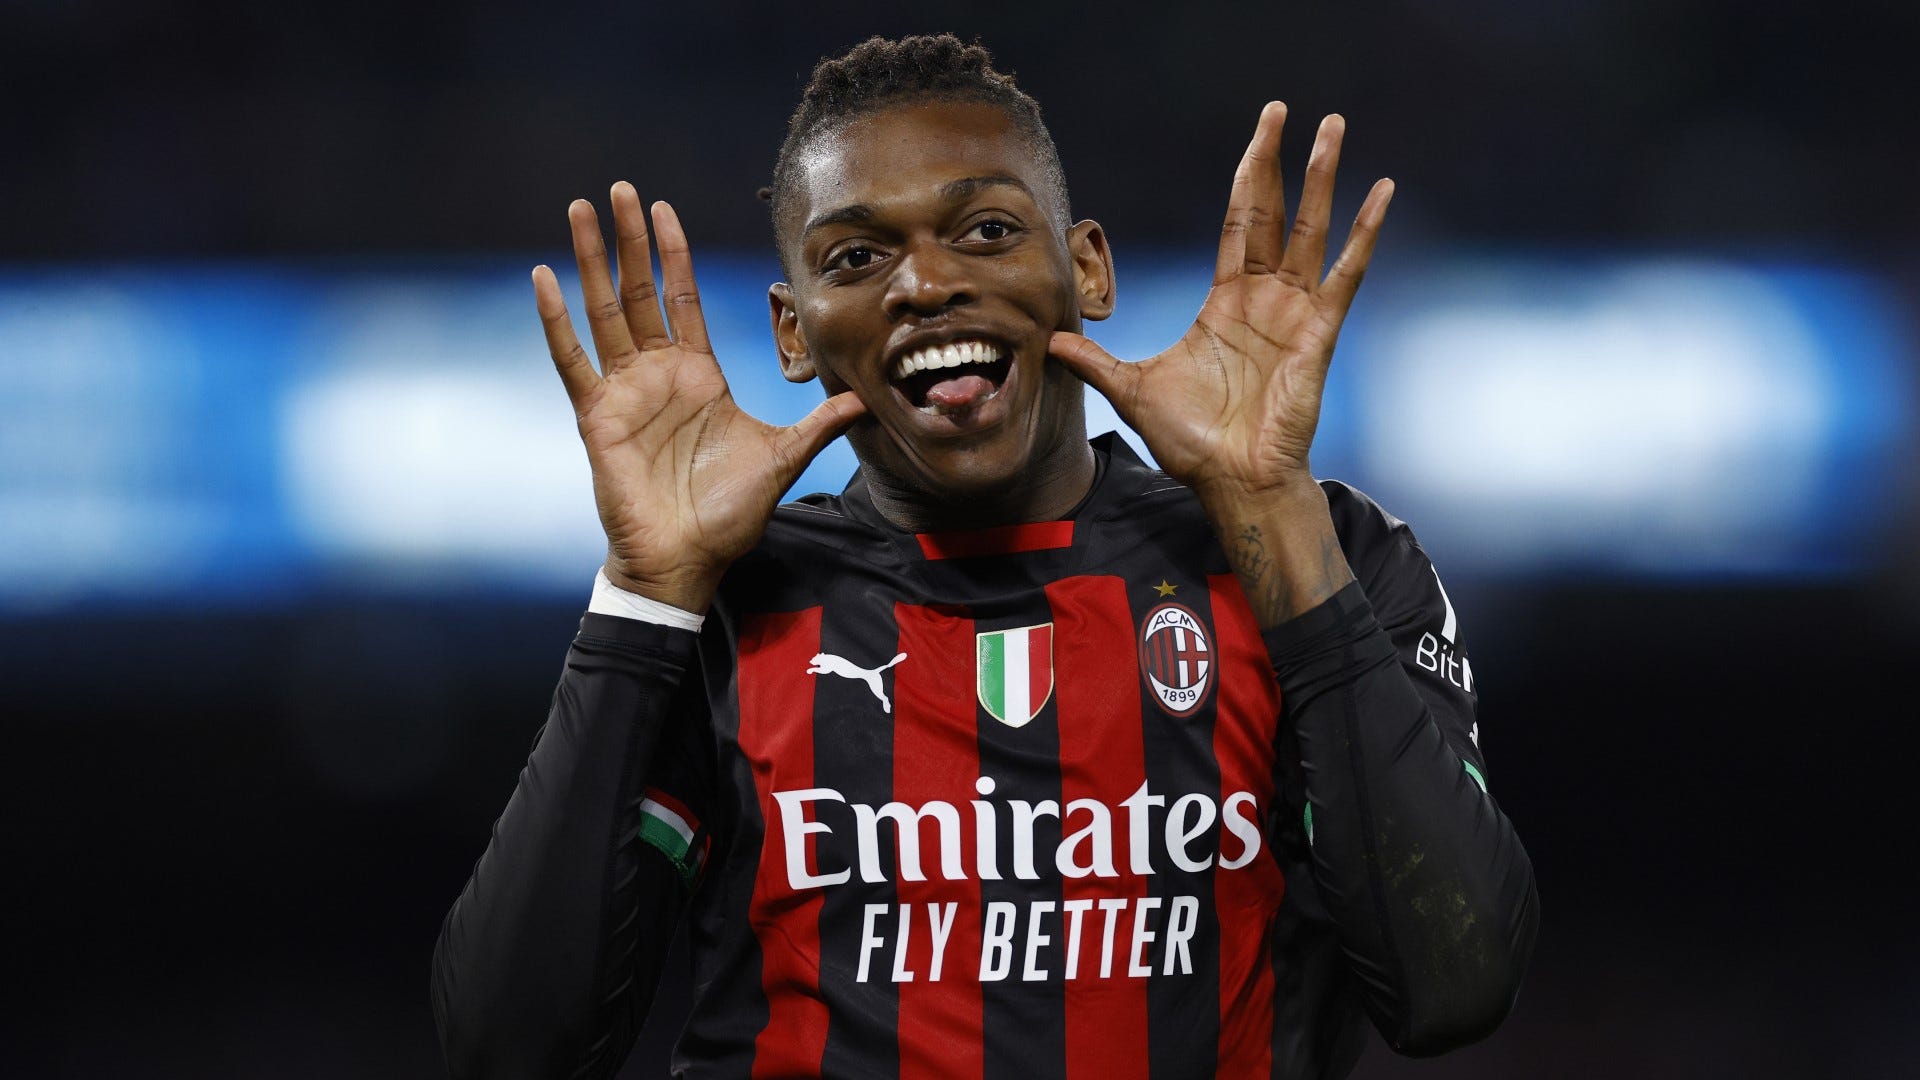 rafael-leao-is-staying-in-italy-chelsea-target-signs-new-five-year-contract-at-ac-milan-or-goal-com-india